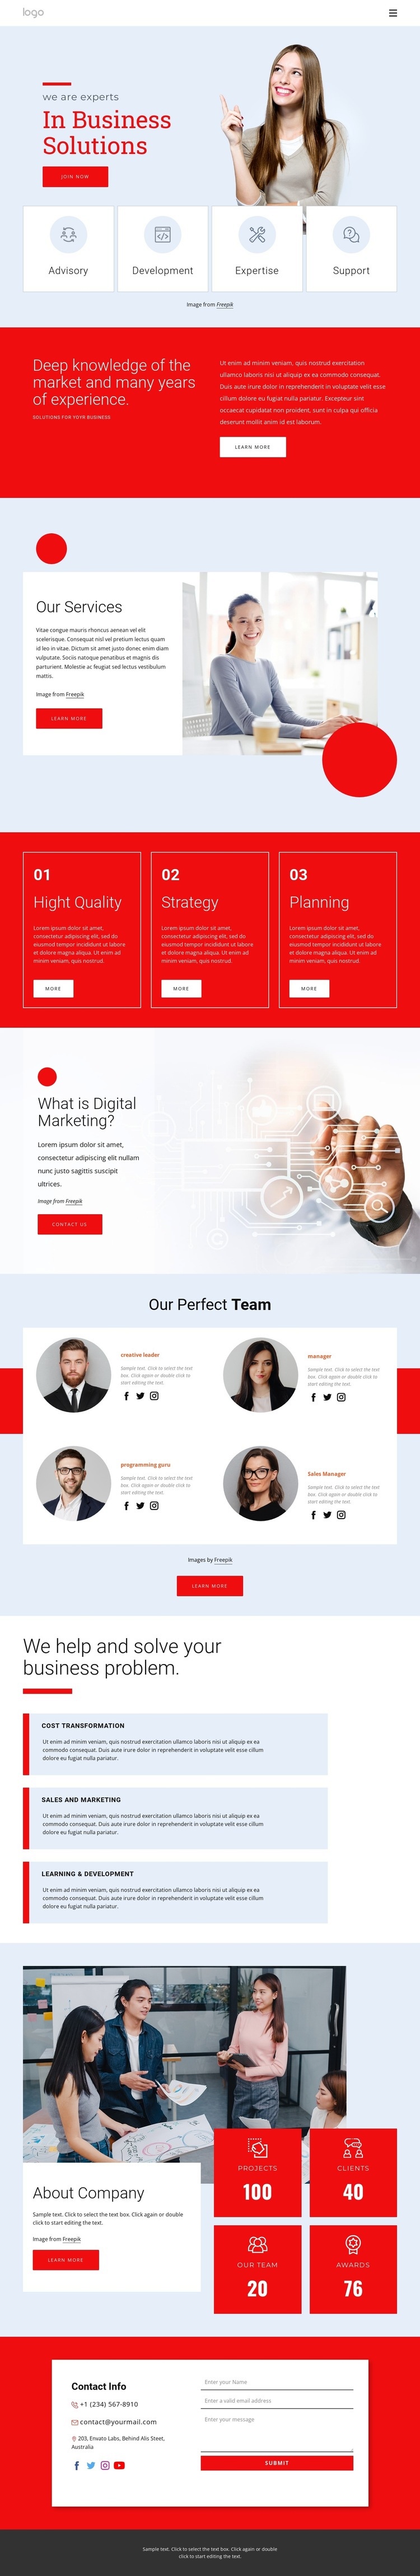 We are experts in business solutions Webflow Template Alternative